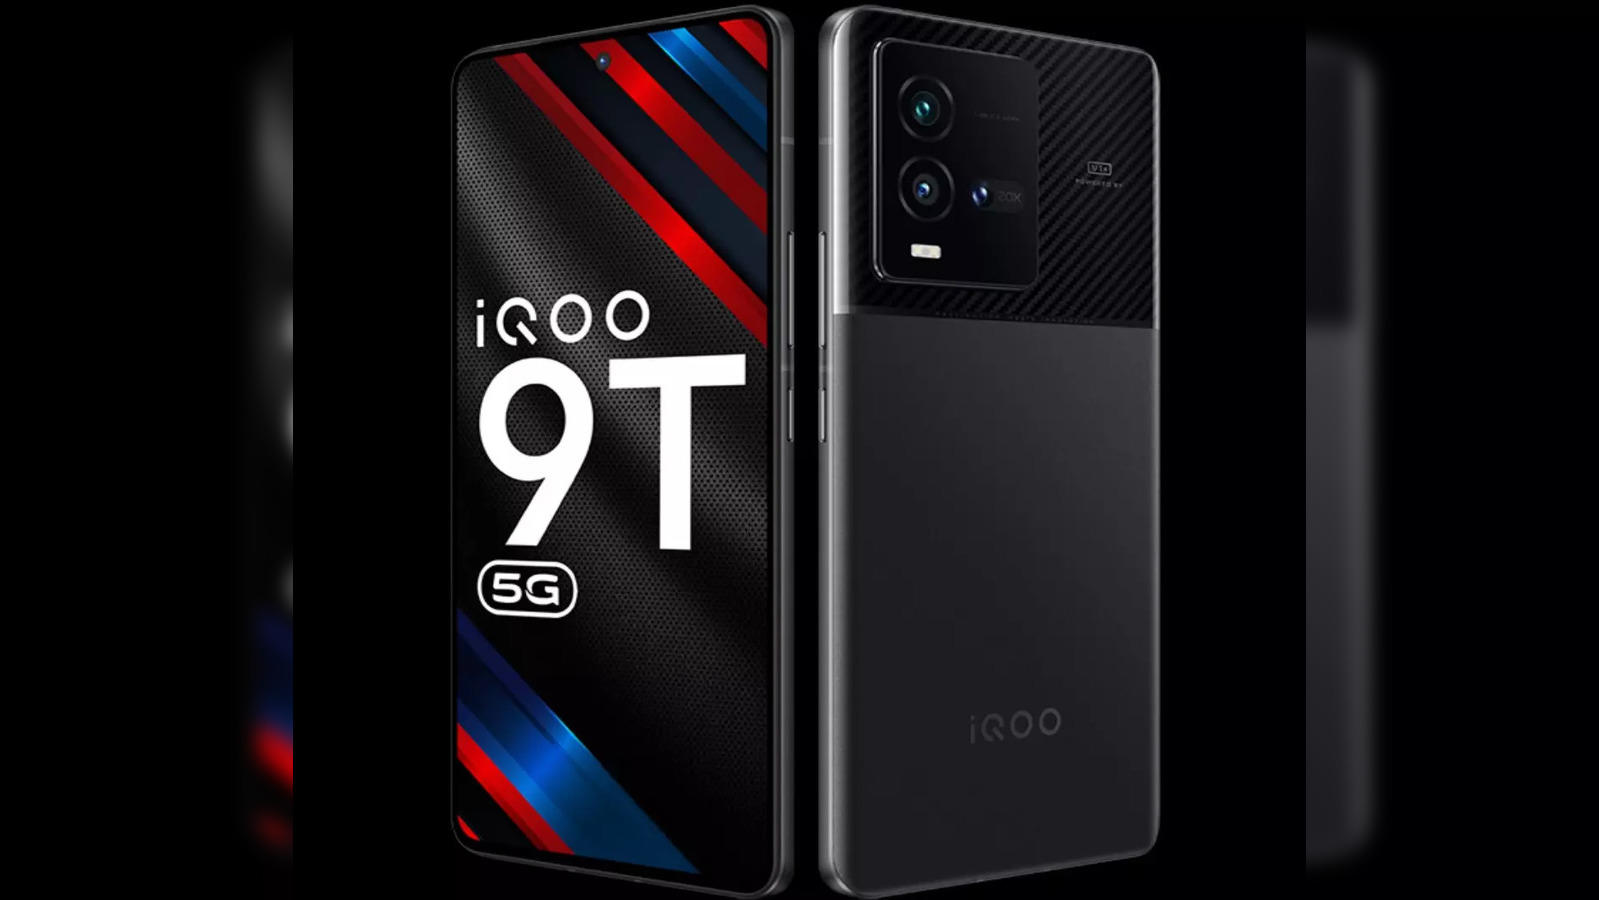 iQOO 9T price: iQOO 9T launched in India: Details about price 